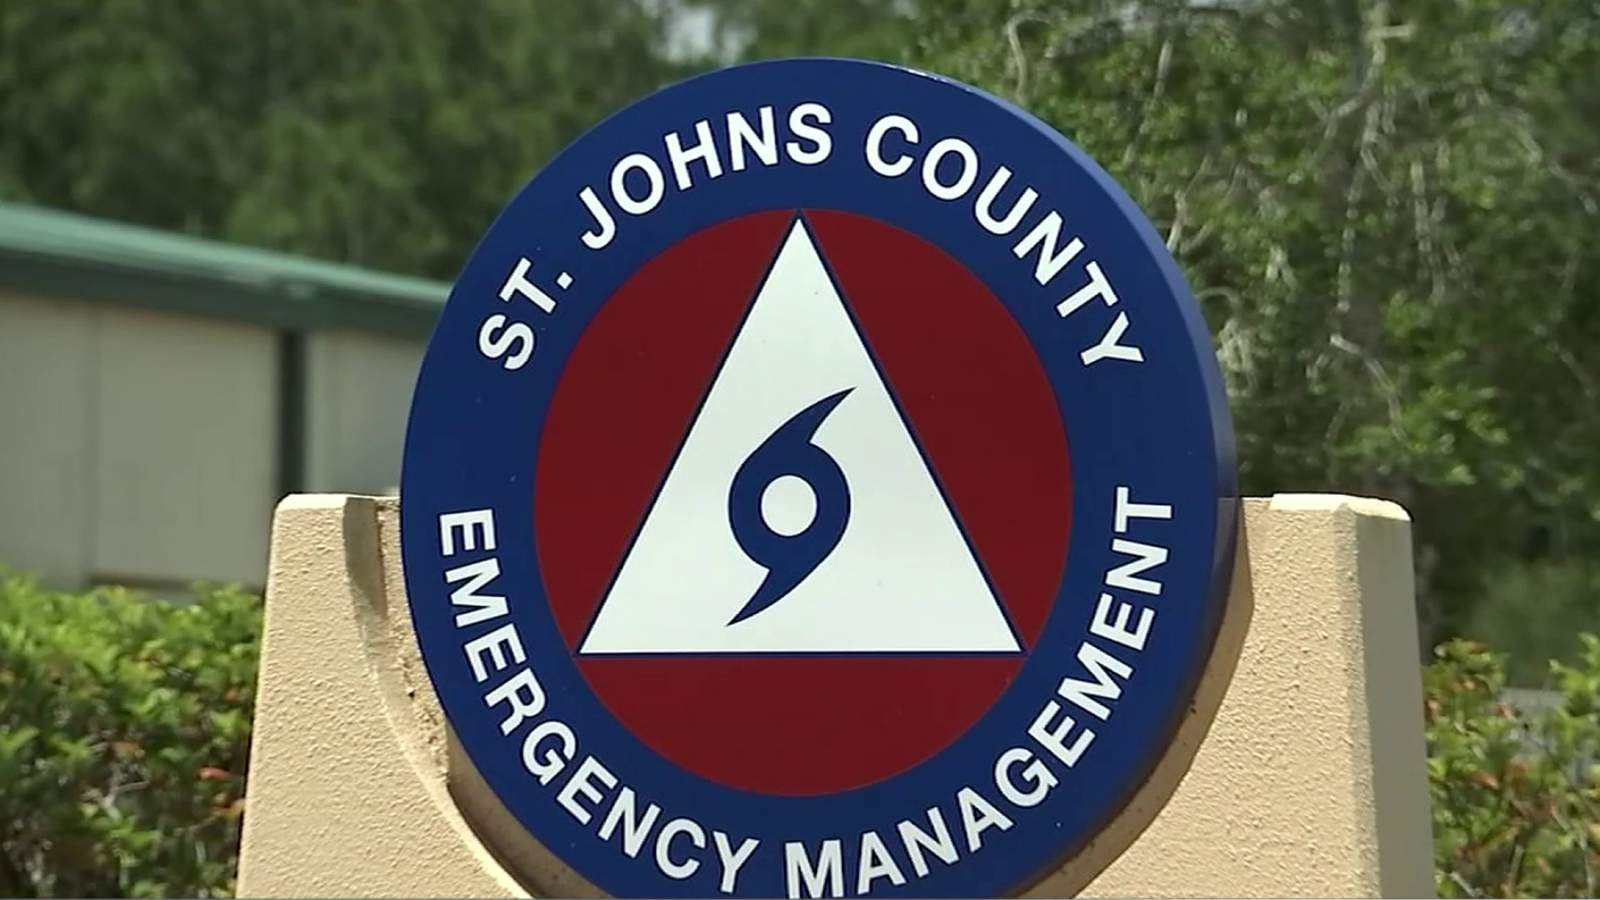 St. Johns County Emergency Management keeping a close eye on flood-prone areas